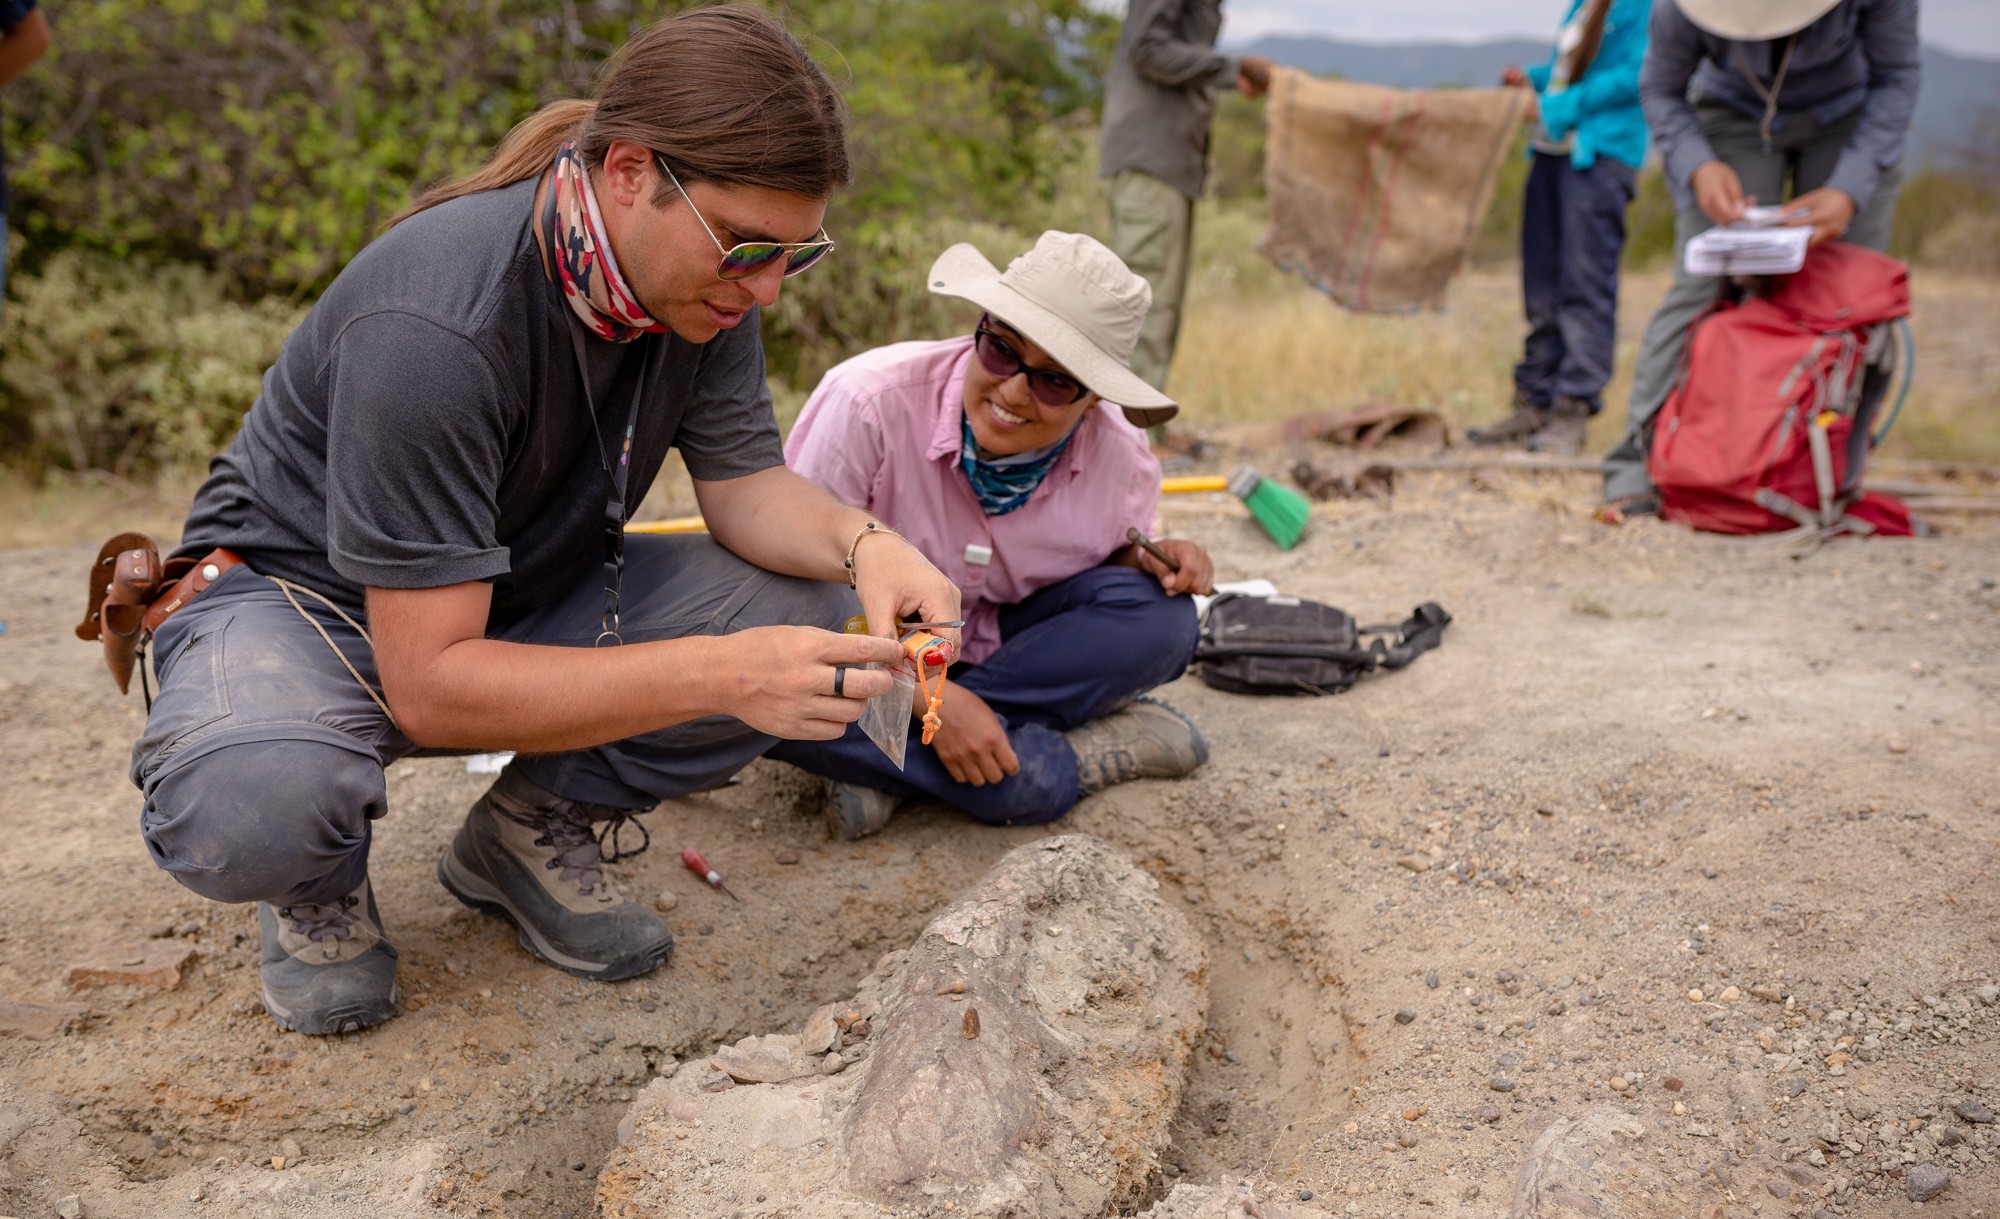 Harvard researcher Javier Luque, a PhD graduate of the U of A (left), and Catalina Suarez of the Smithsonian Tropical Research Institute excavate fossils in the tropics. (Photo: Felipe Villegas, Humboldt Institute)